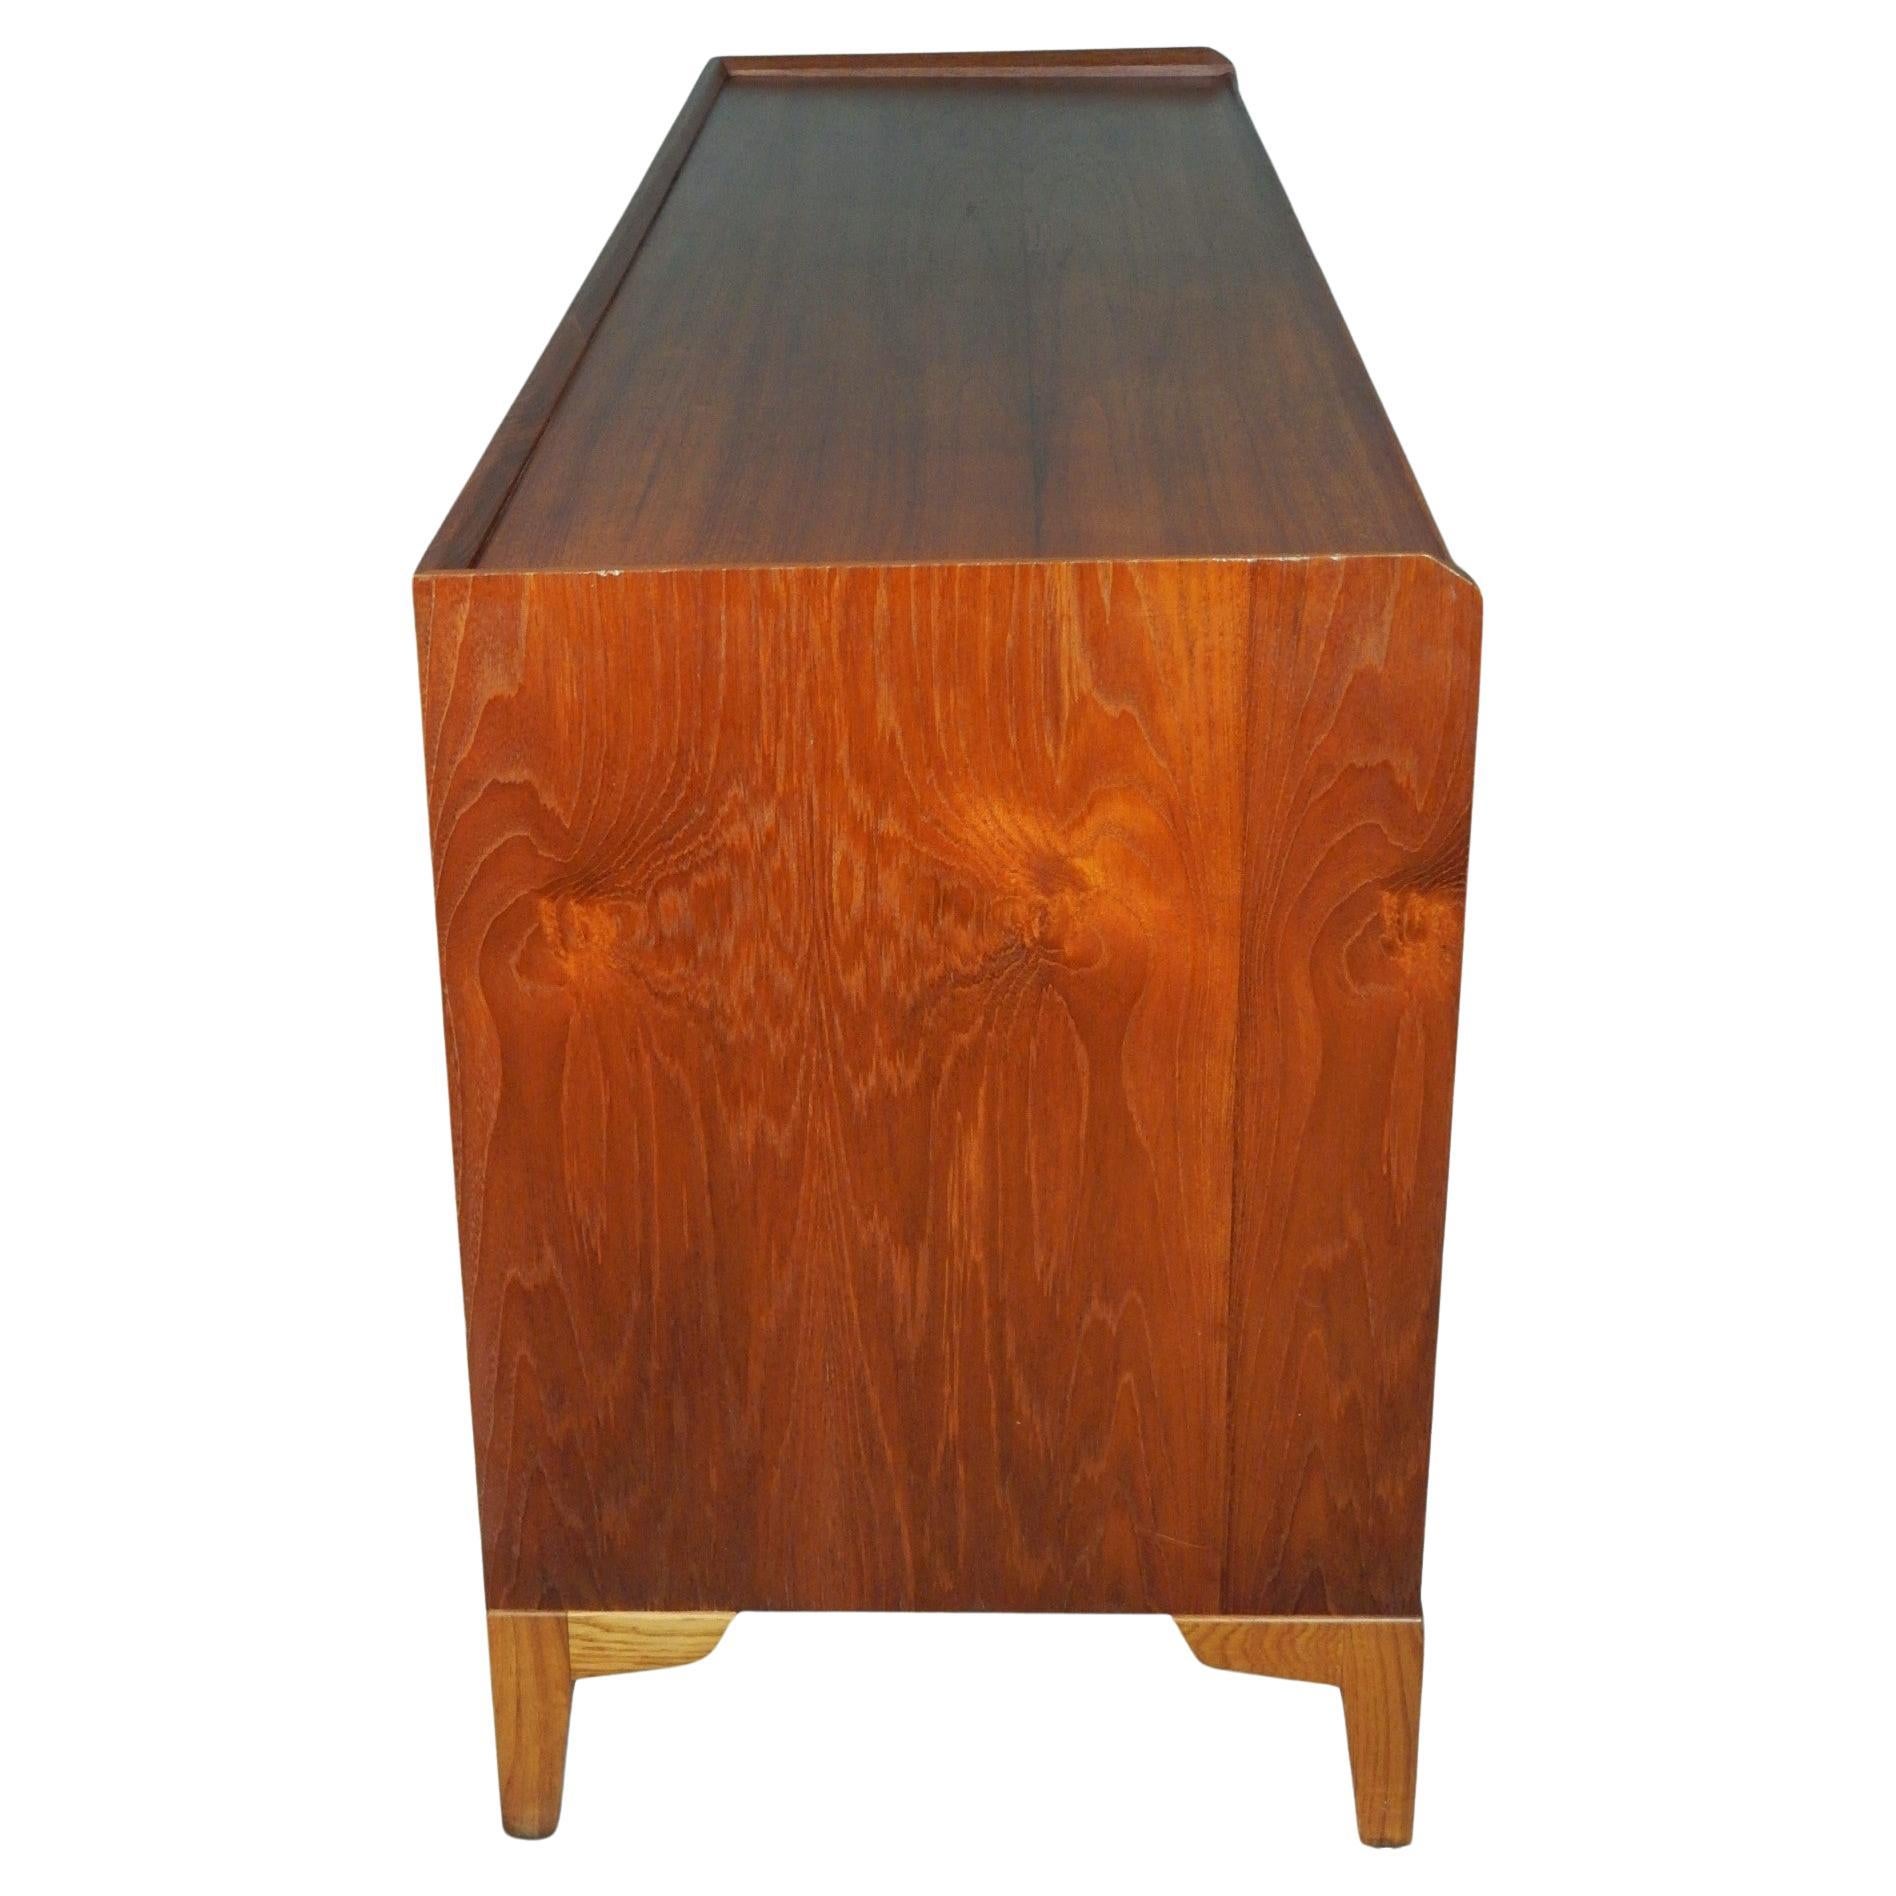 American Mid Century Walnut Low Chest of Drawers by Charles Pechanec 1950's For Sale